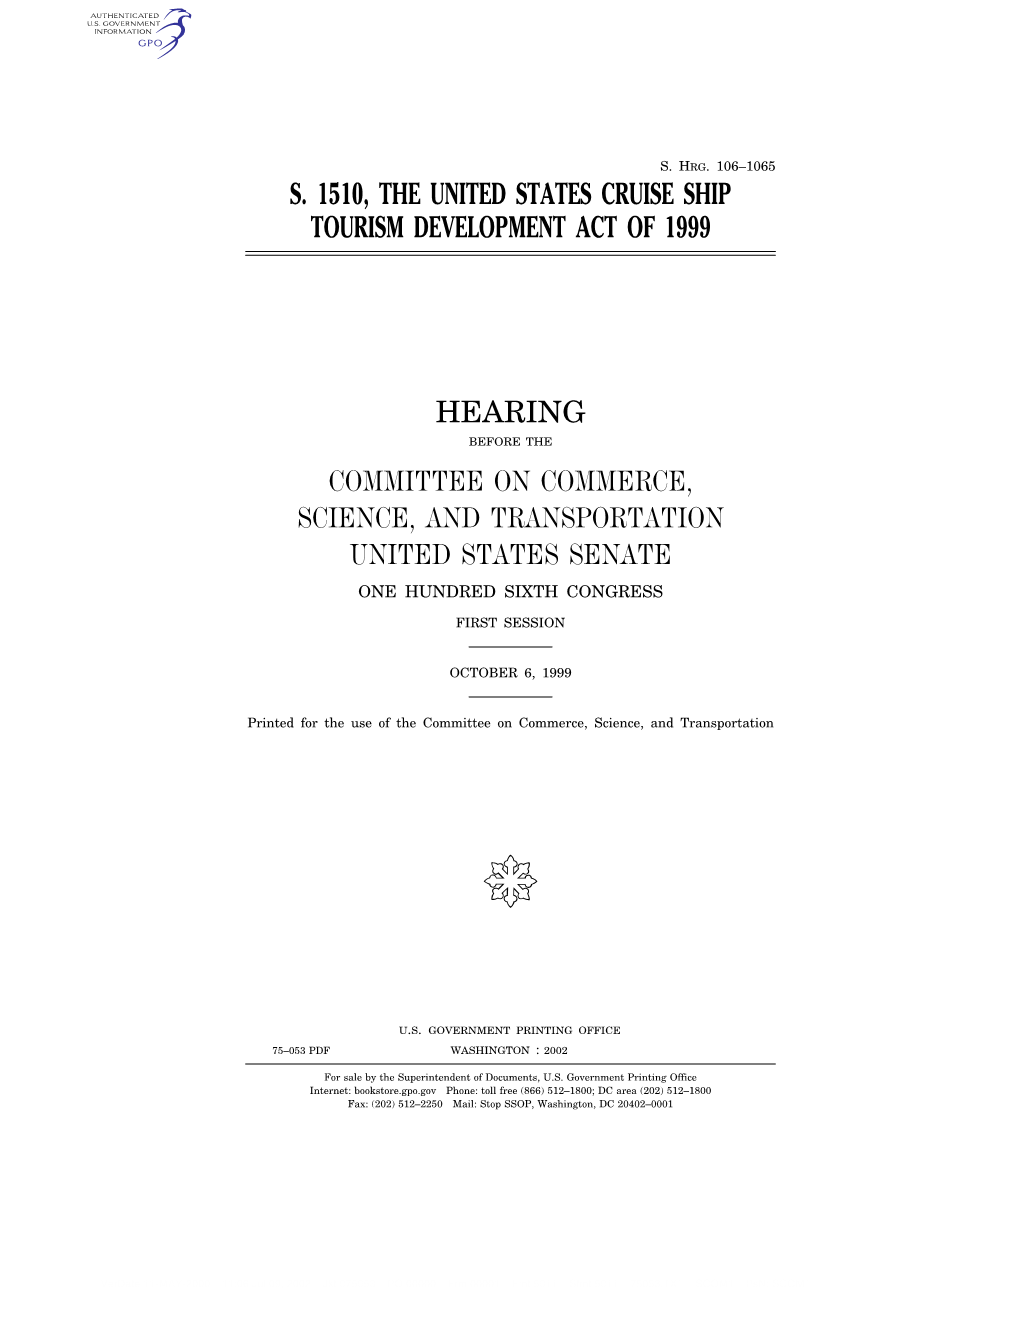 S. 1510, the United States Cruise Ship Tourism Development Act of 1999